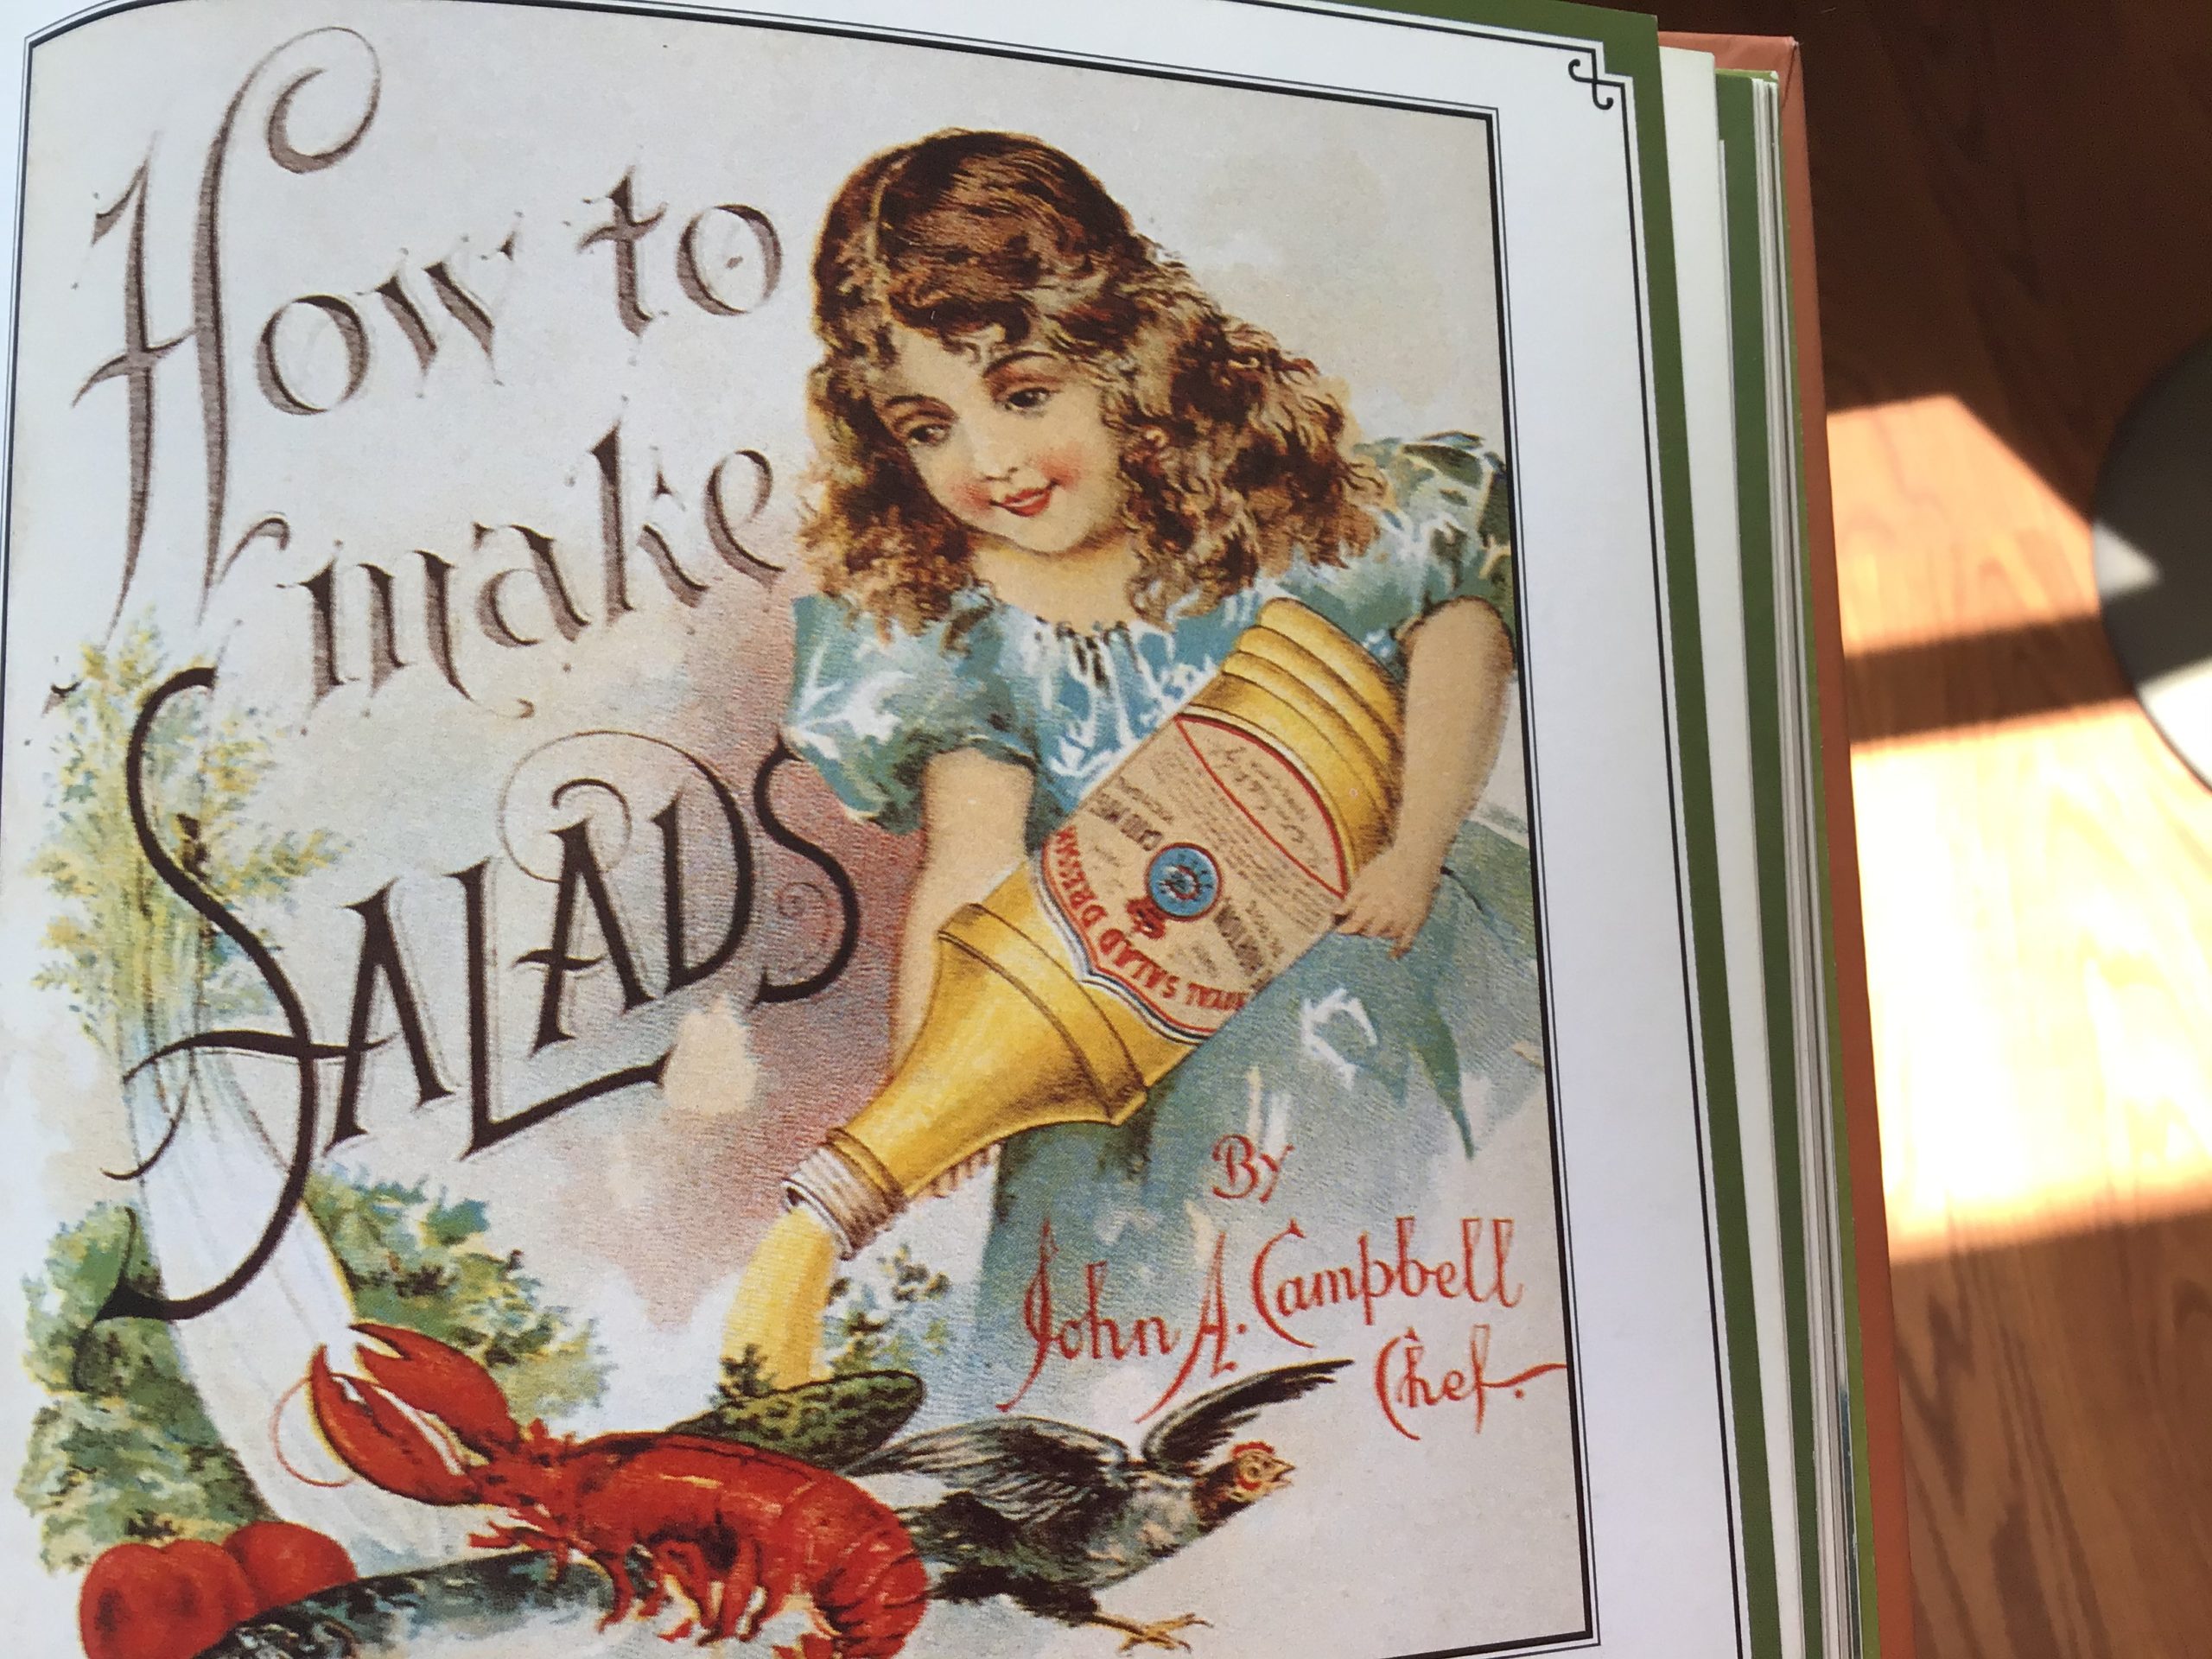 Victorian Salads Image Of Little Girl With Lettuce, Lobster And Dressing Smithsonian